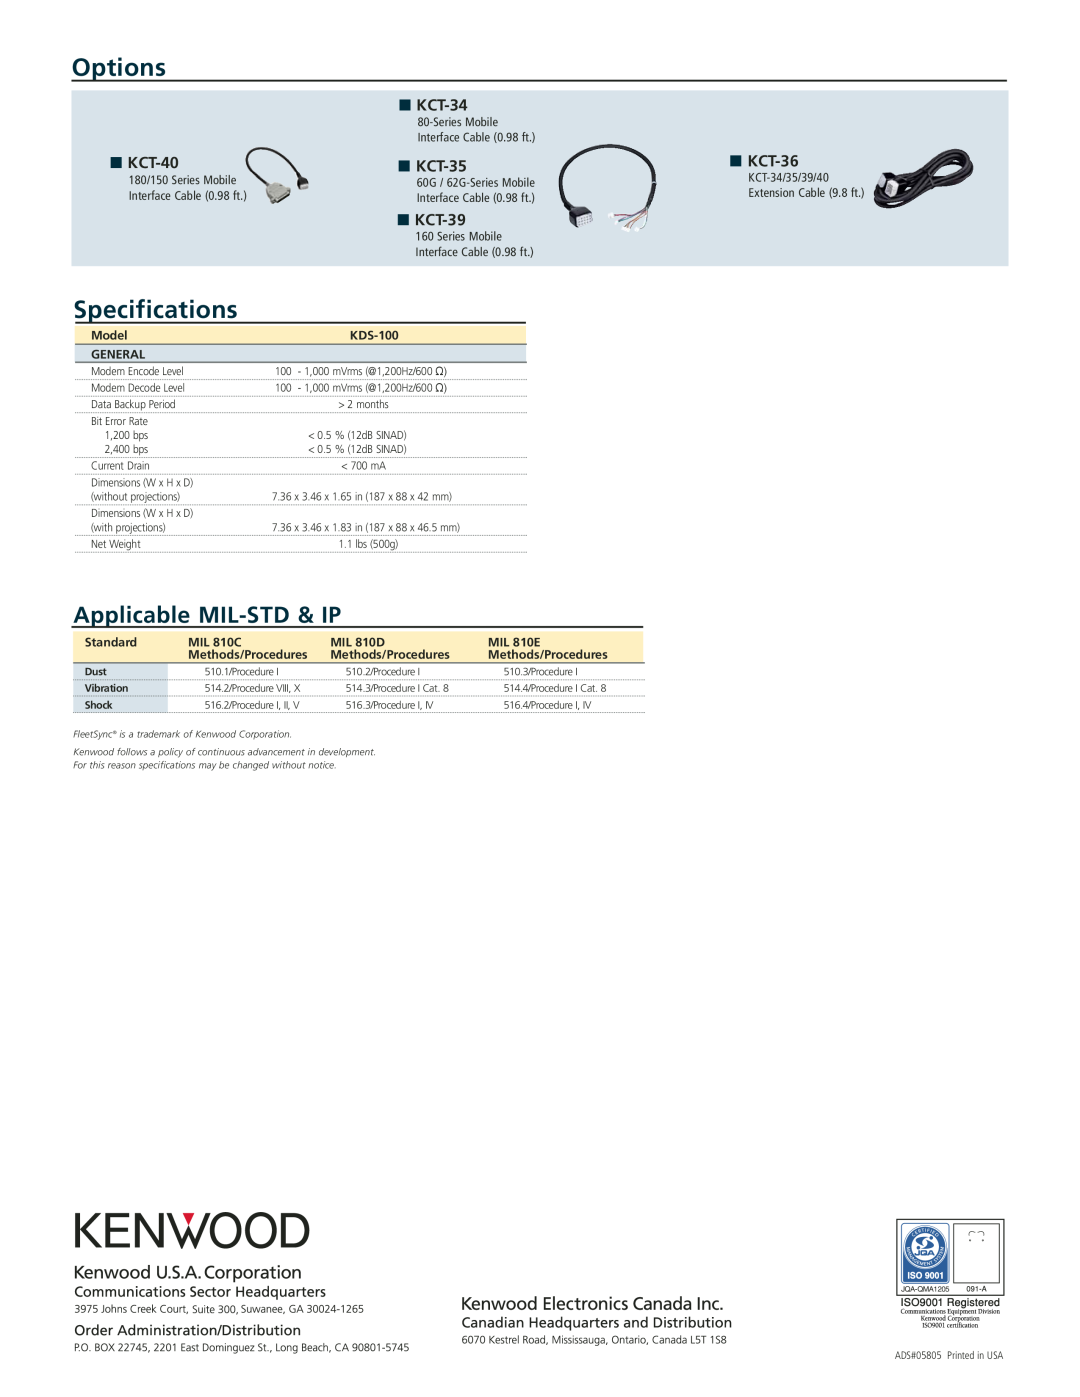 Kenwood KDS-100 manual Options, Specifications, Applicable MIL-STD & IP, KCT-34, KCT-40, KCT-35, KCT-36, KCT-39 